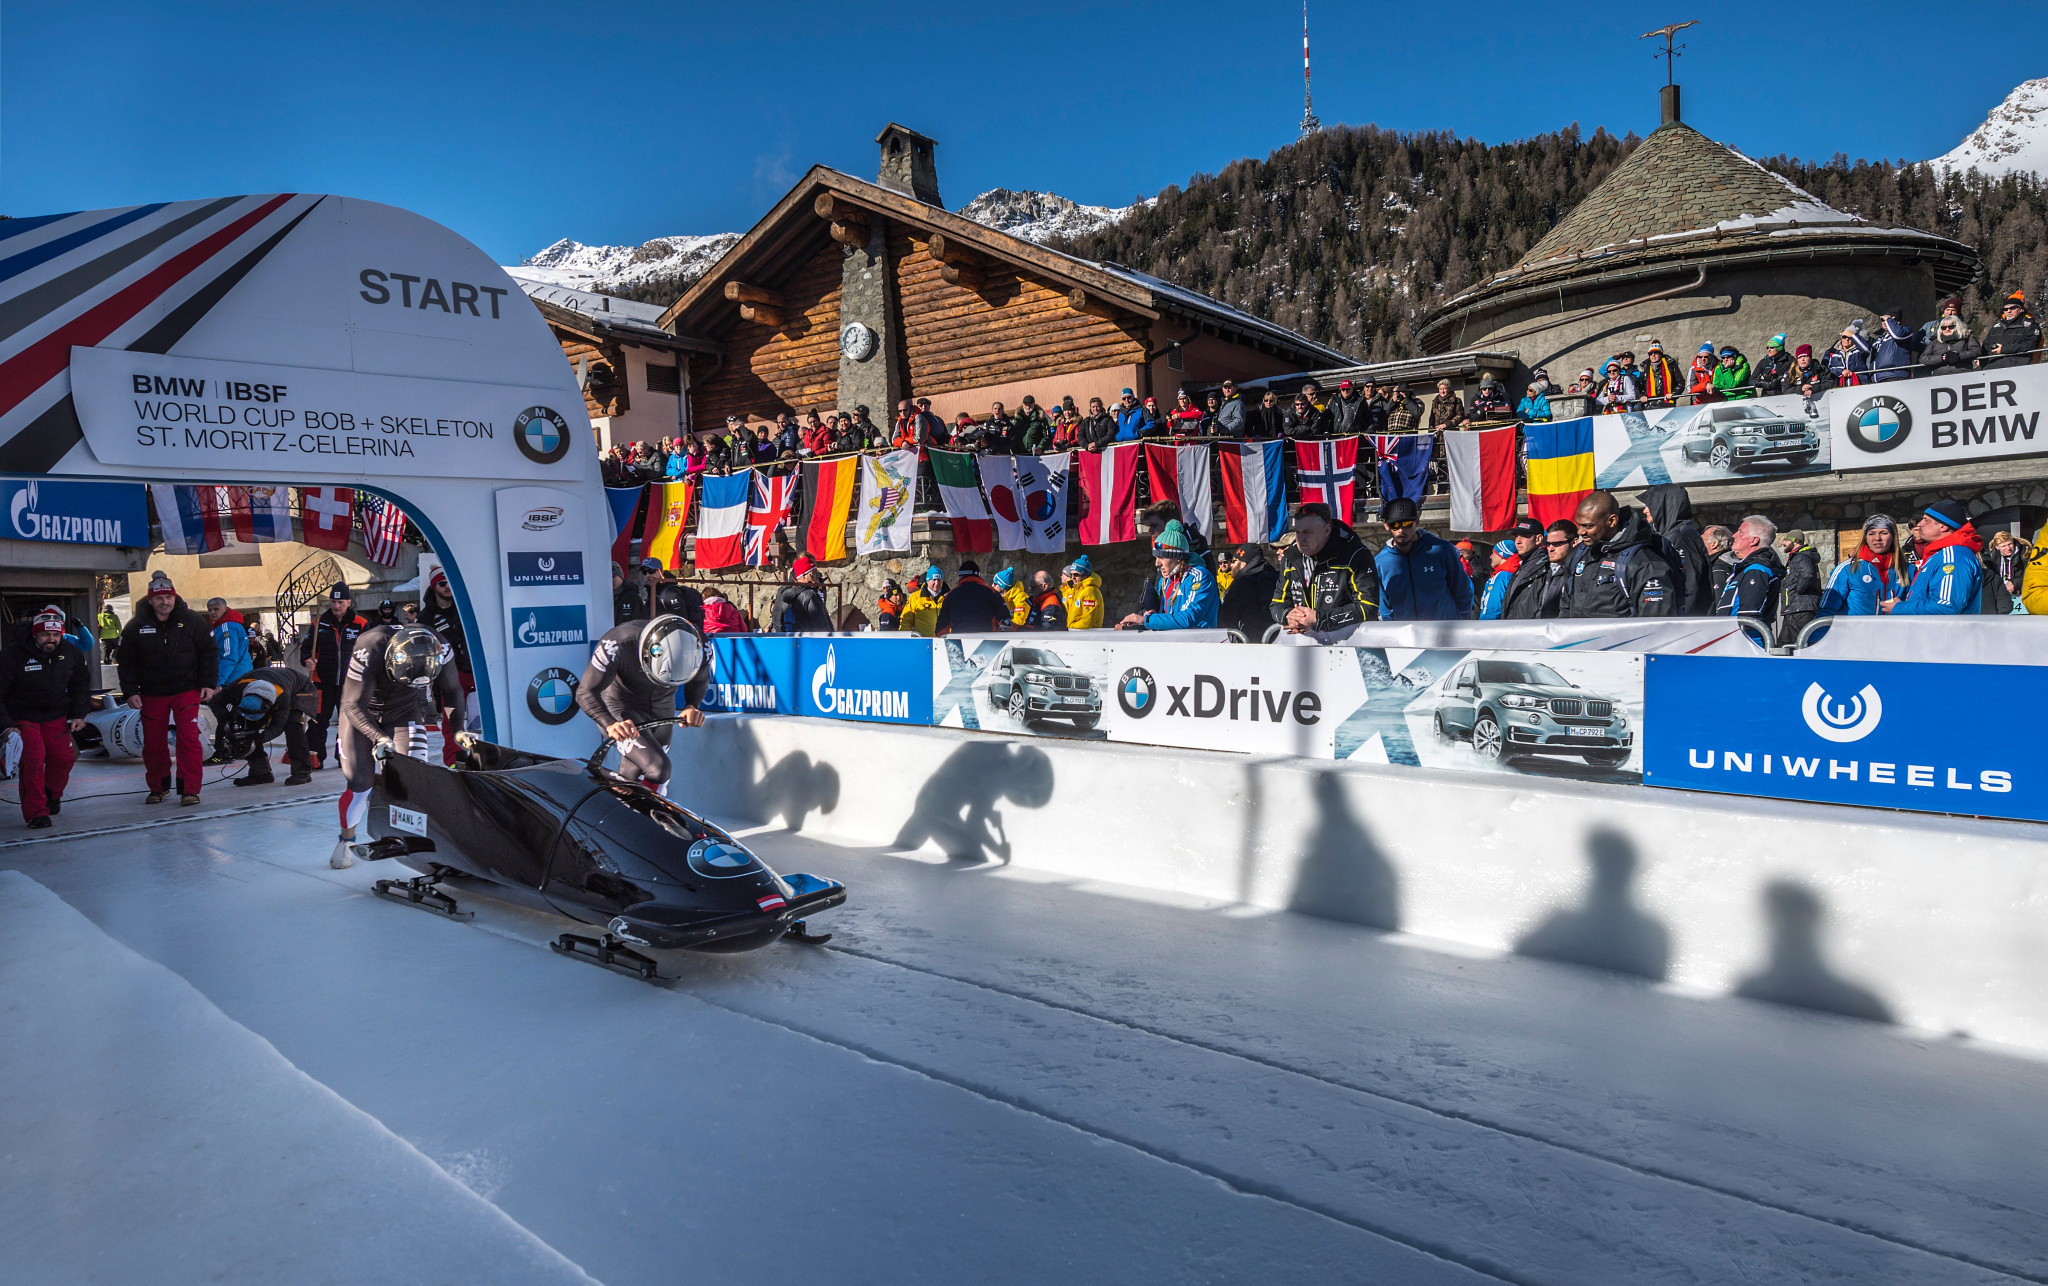 Walk of Fame to be officially opened at Olympic Bob Run in St. Moritz